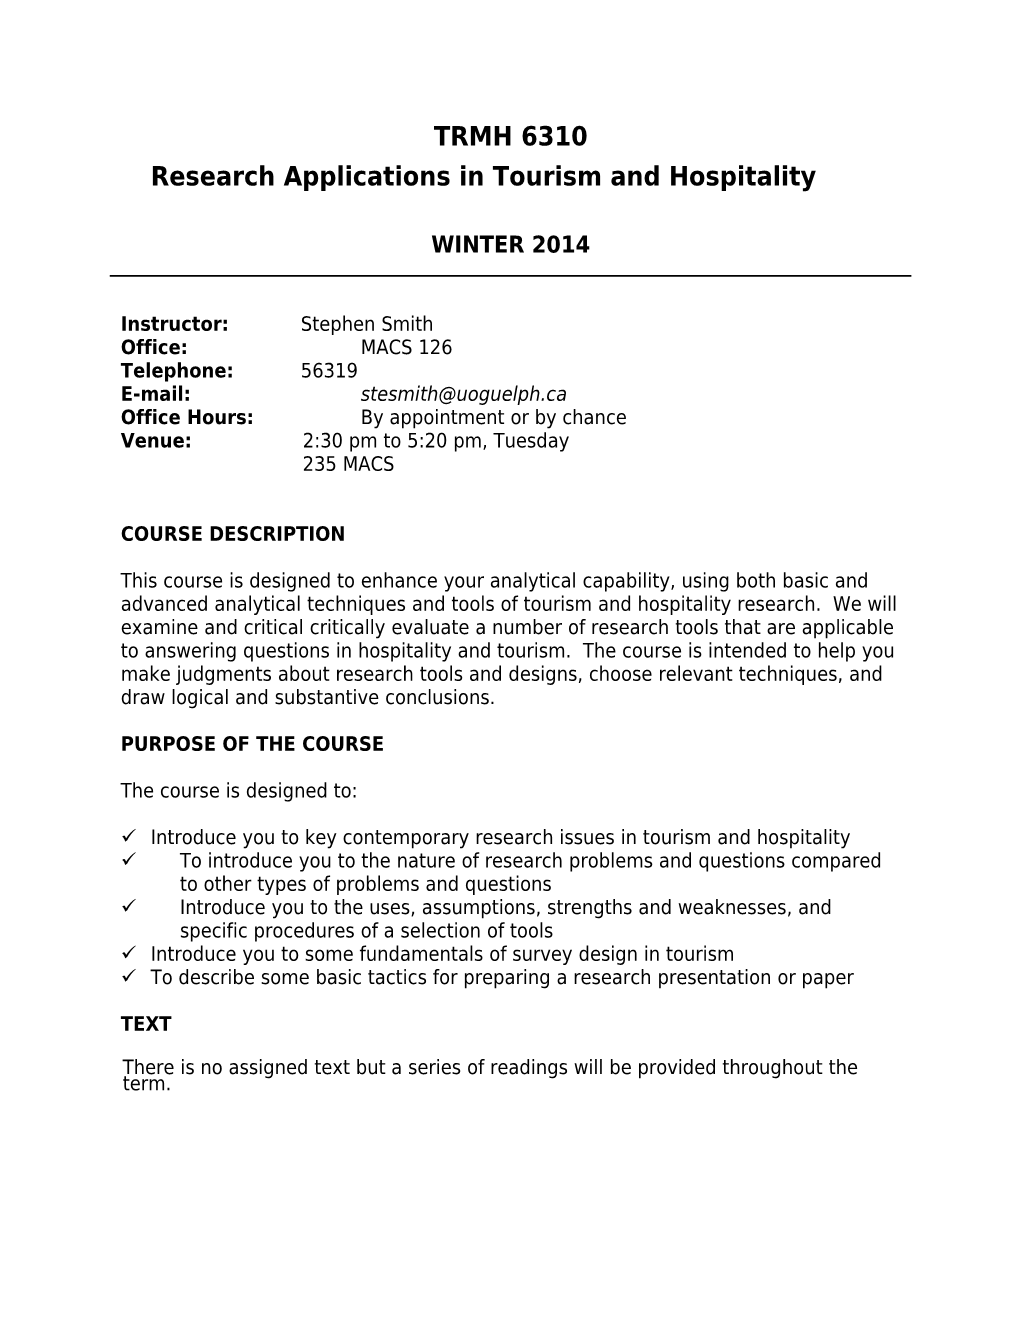 Research Applications in Tourism and Hospitality